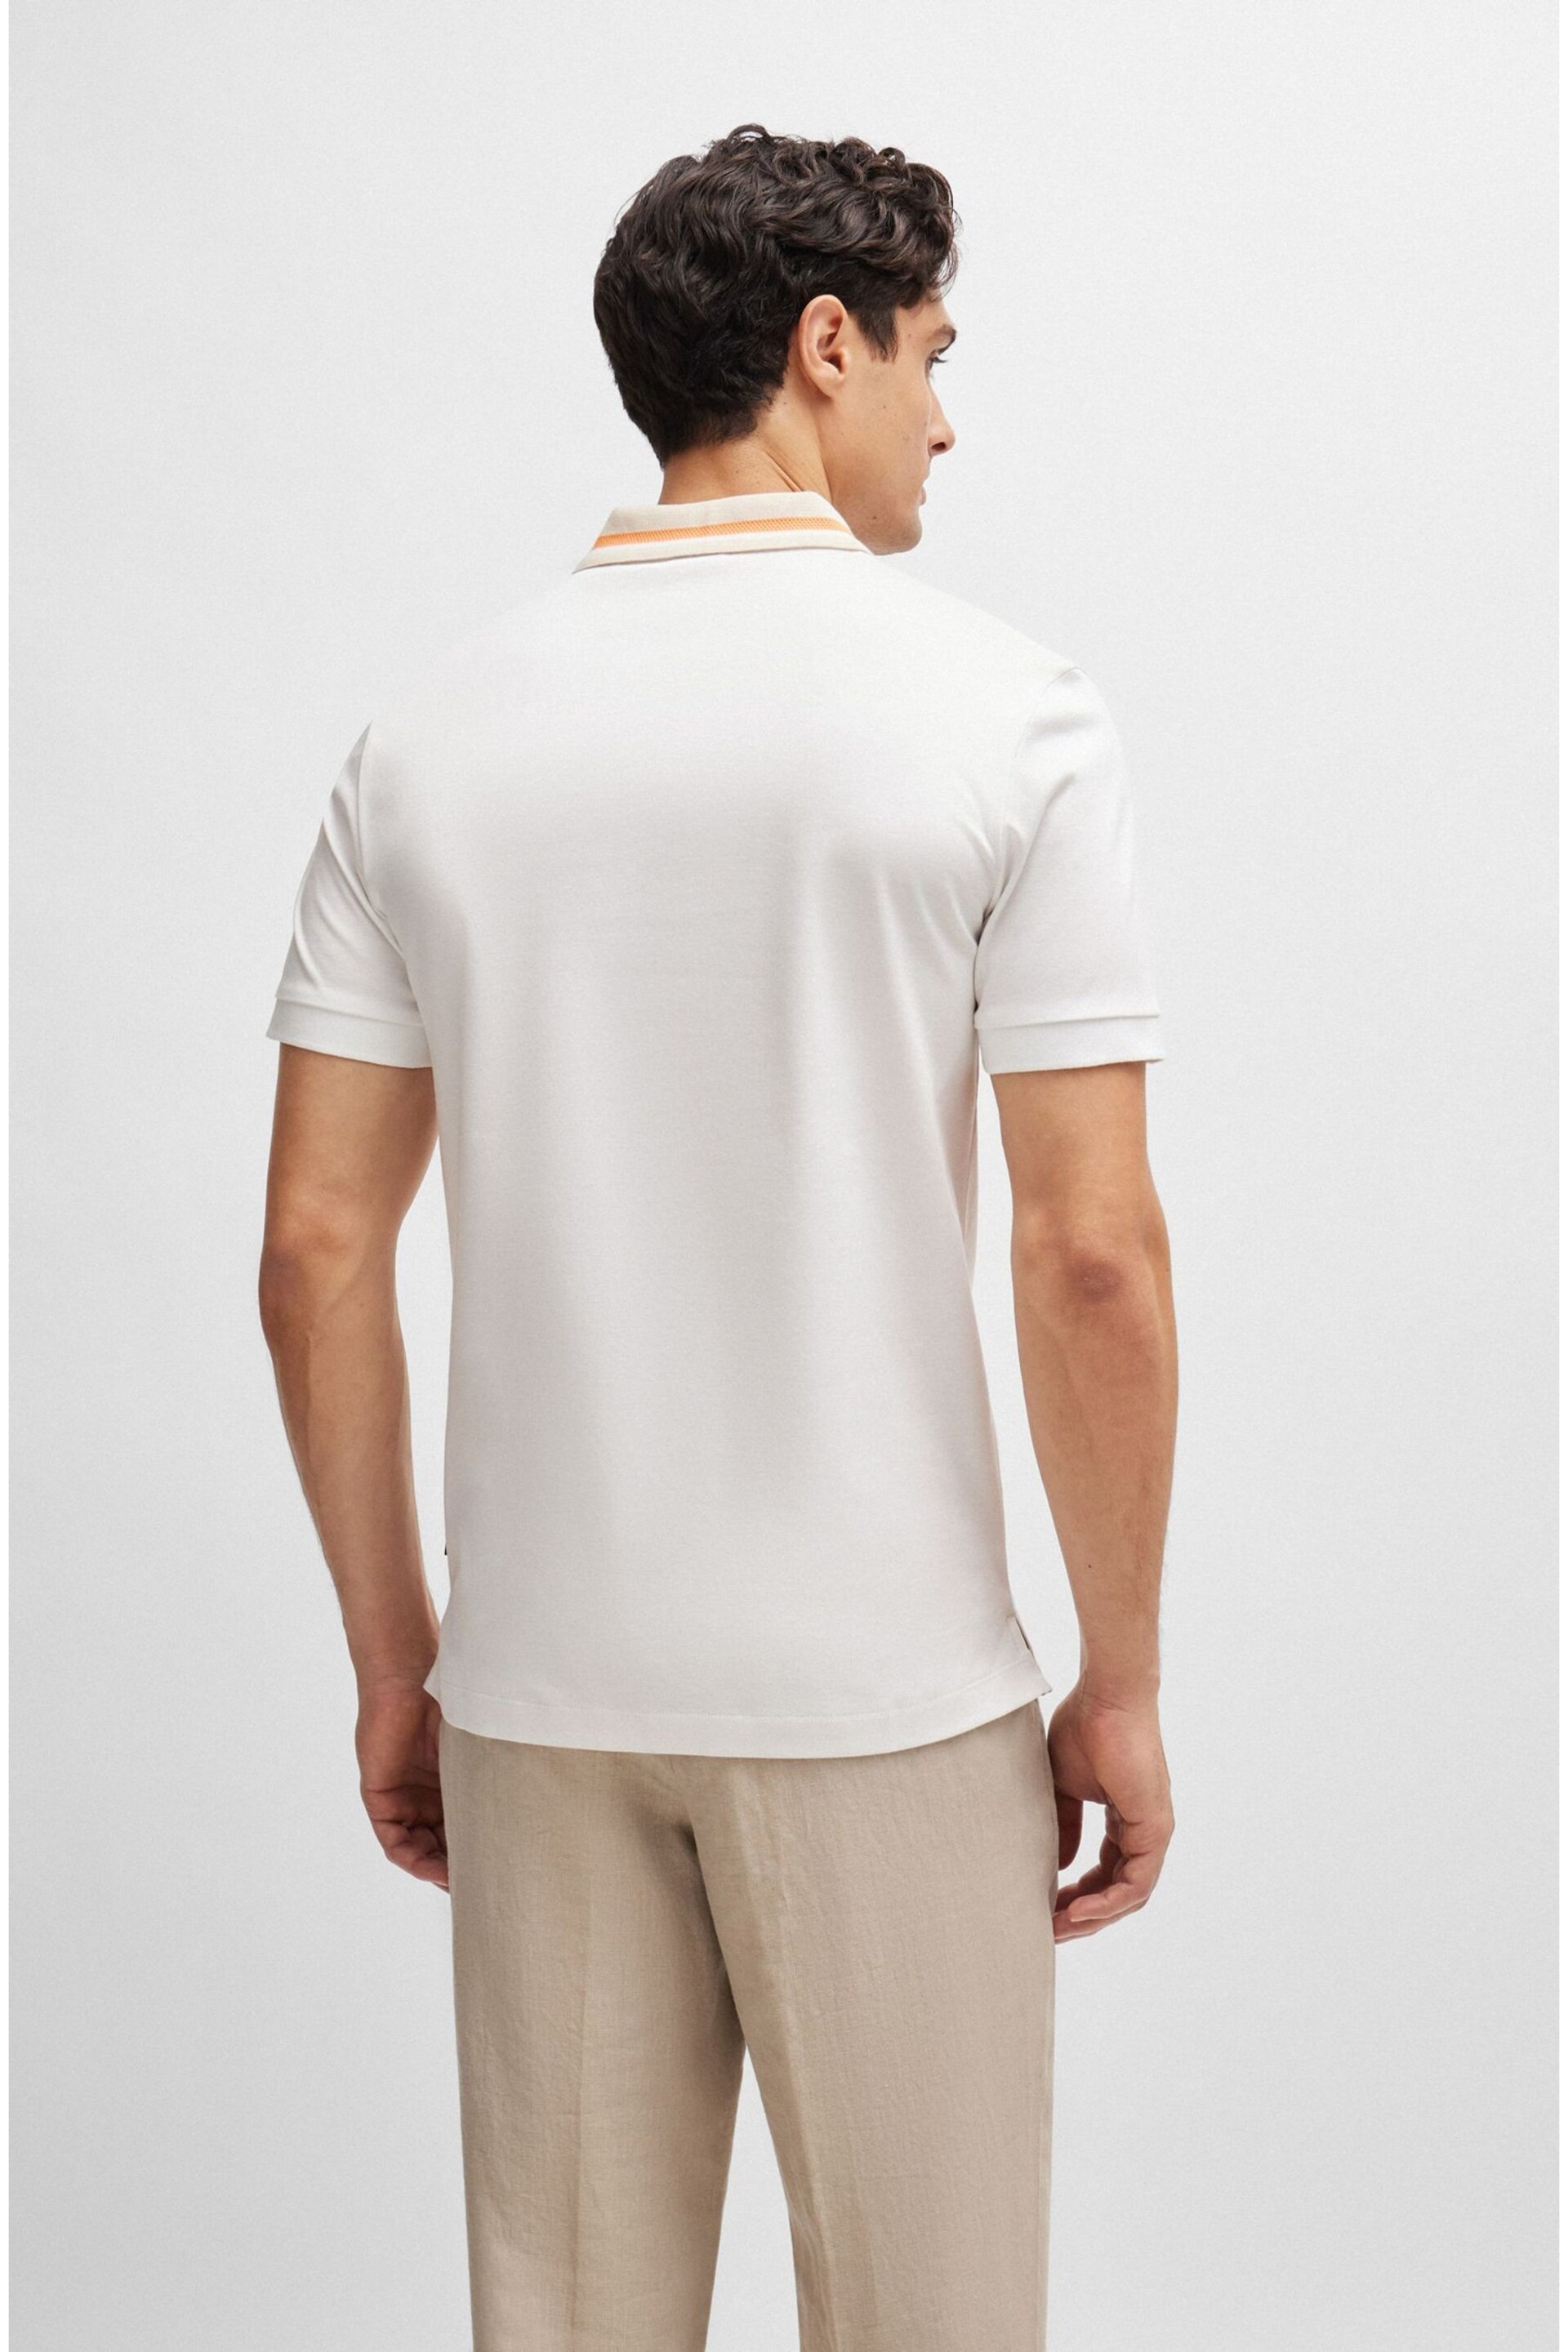 BOSS White Contrast Collar Slim Fit Polo Shirt - Image 3 of 5